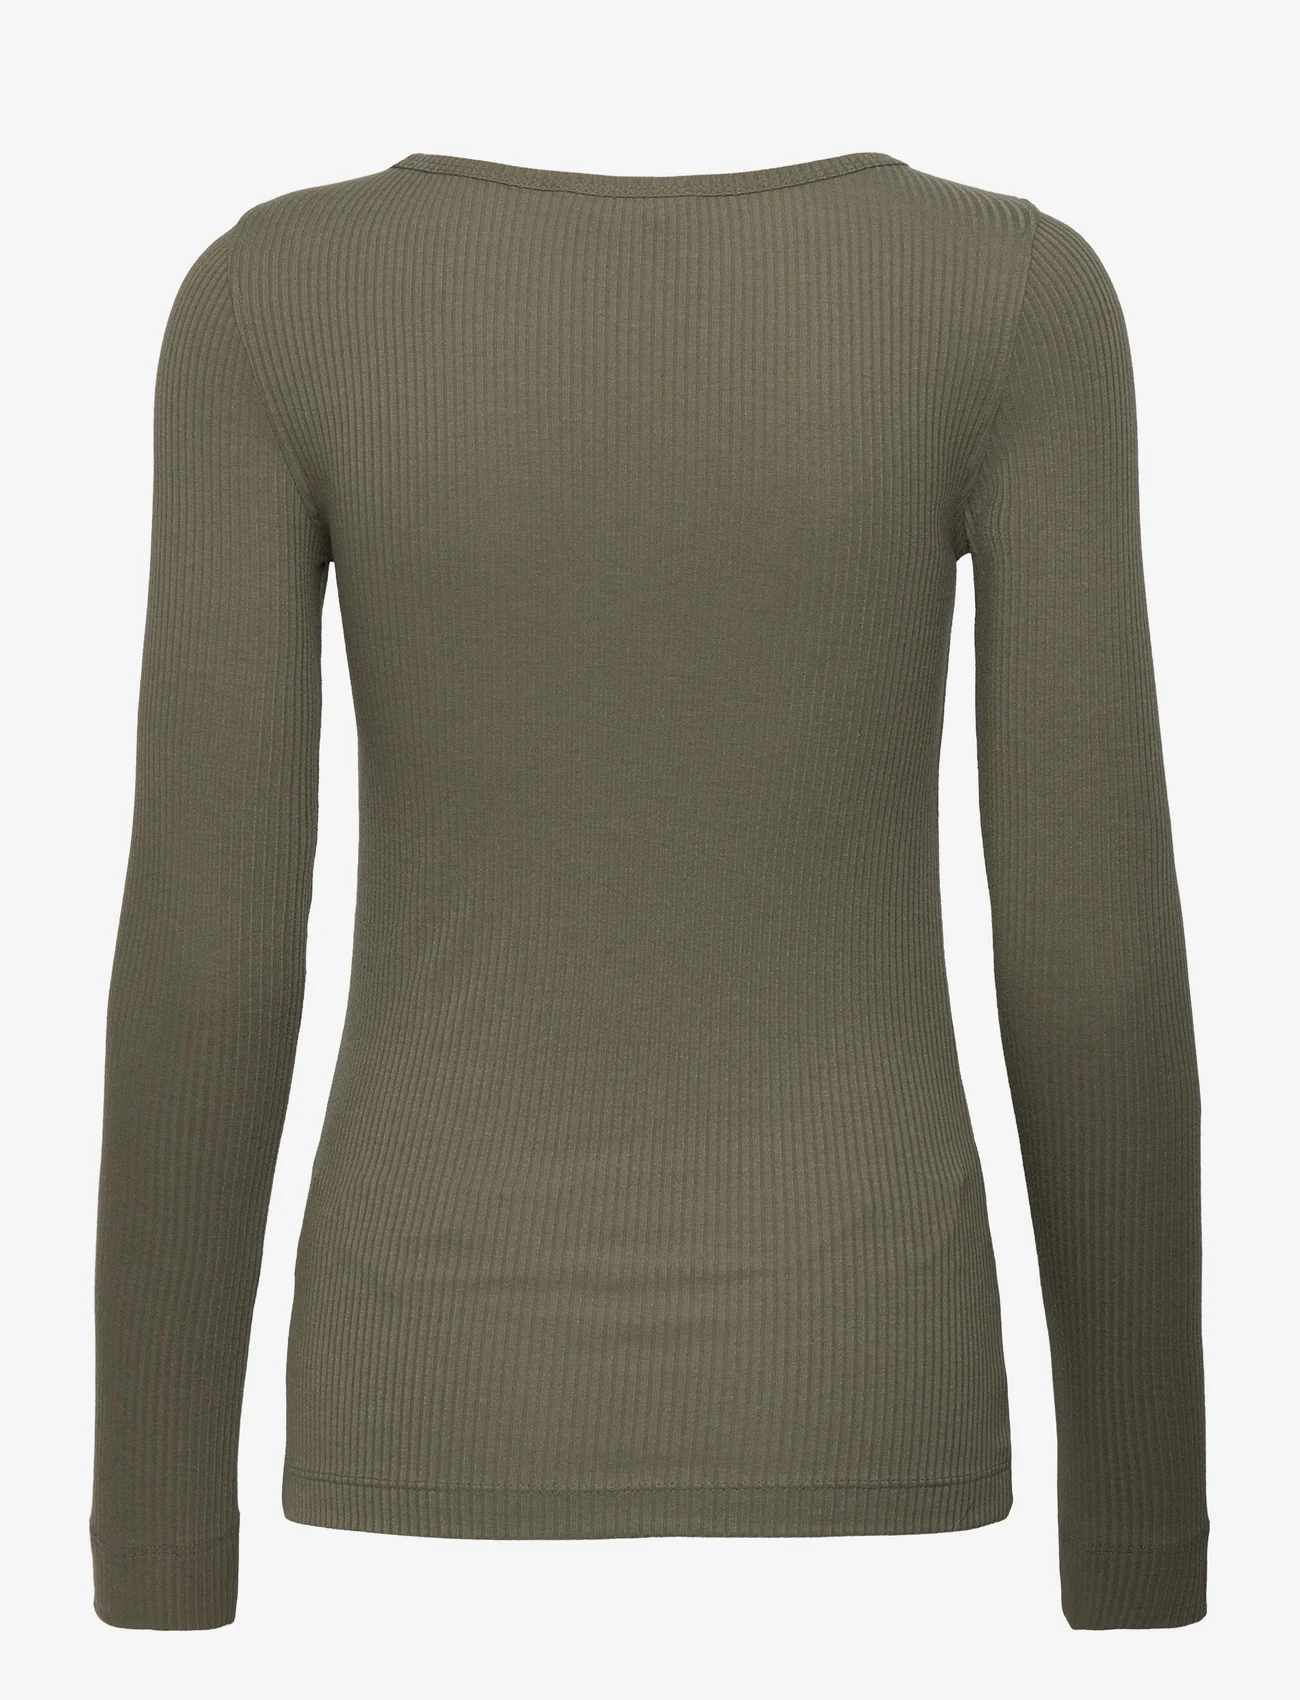 Lee Jeans - LS BOAT NECK TEE - long-sleeved tops - olive grove - 1